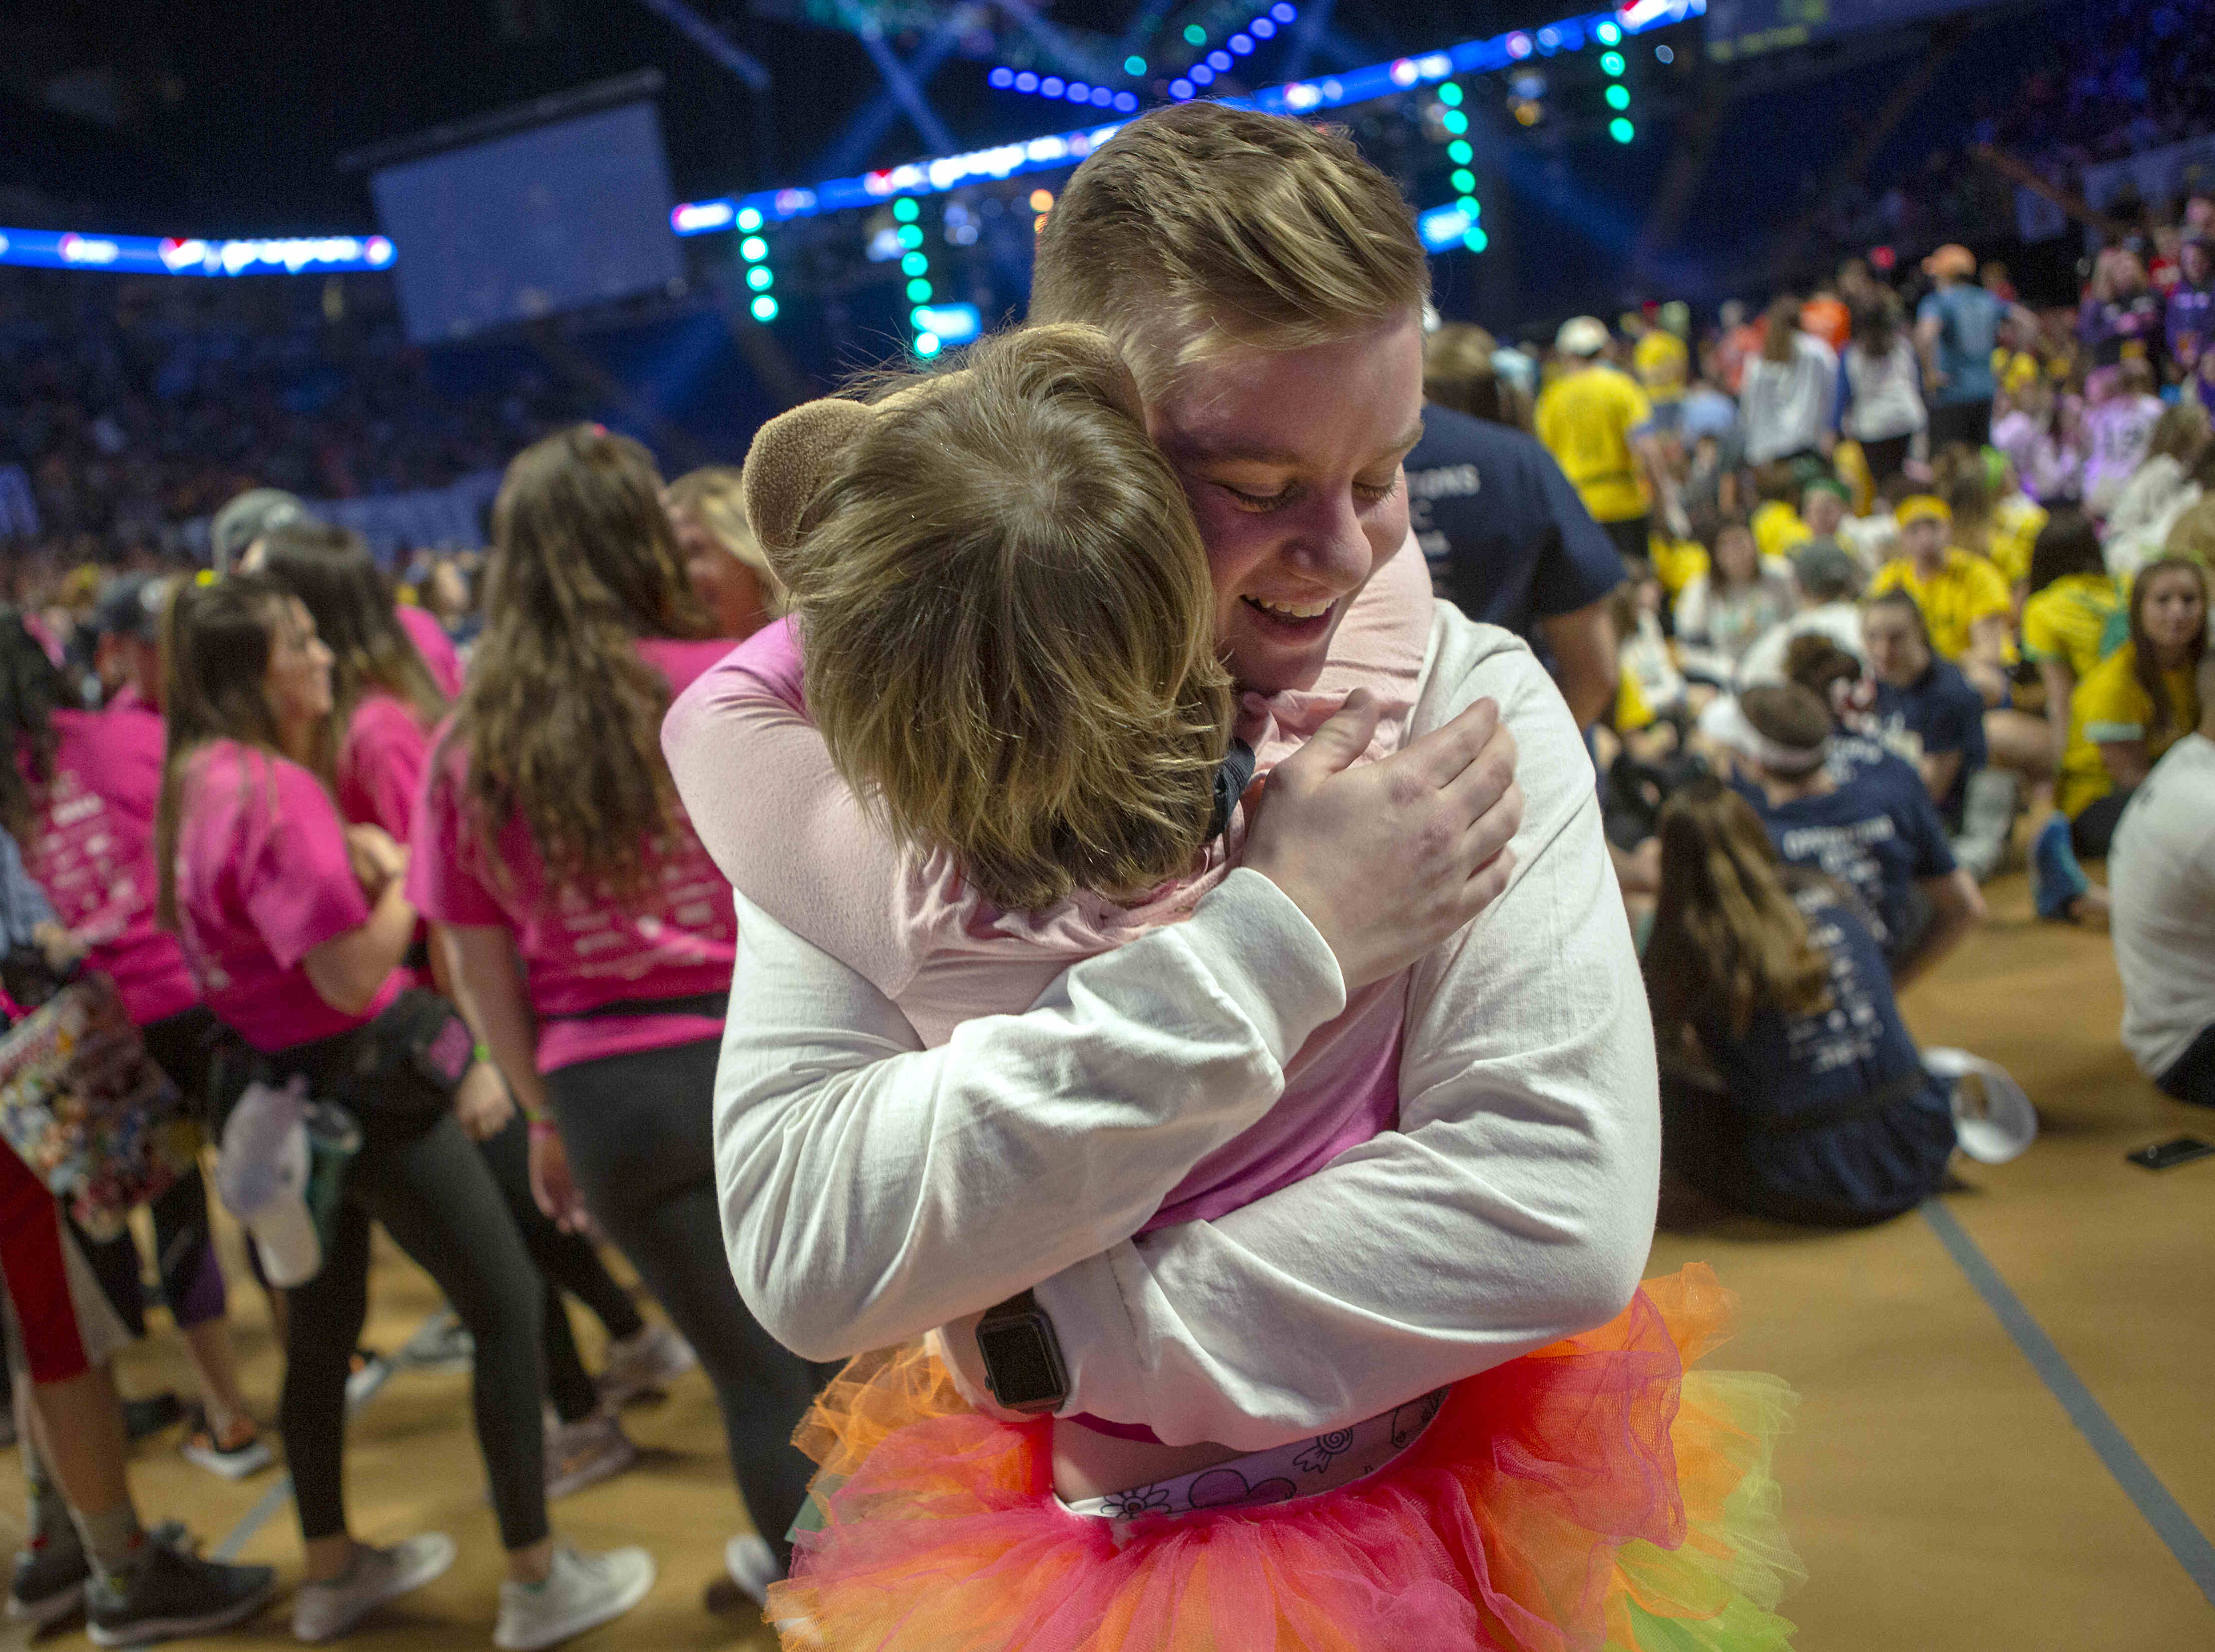 A young man and a child embrace on the floor of THON at the Bryce Jordan Center. The man, facing the camera, is smiling. Several people are in the background – some standing, some seated, slightly out of focus. A stage is also visible.